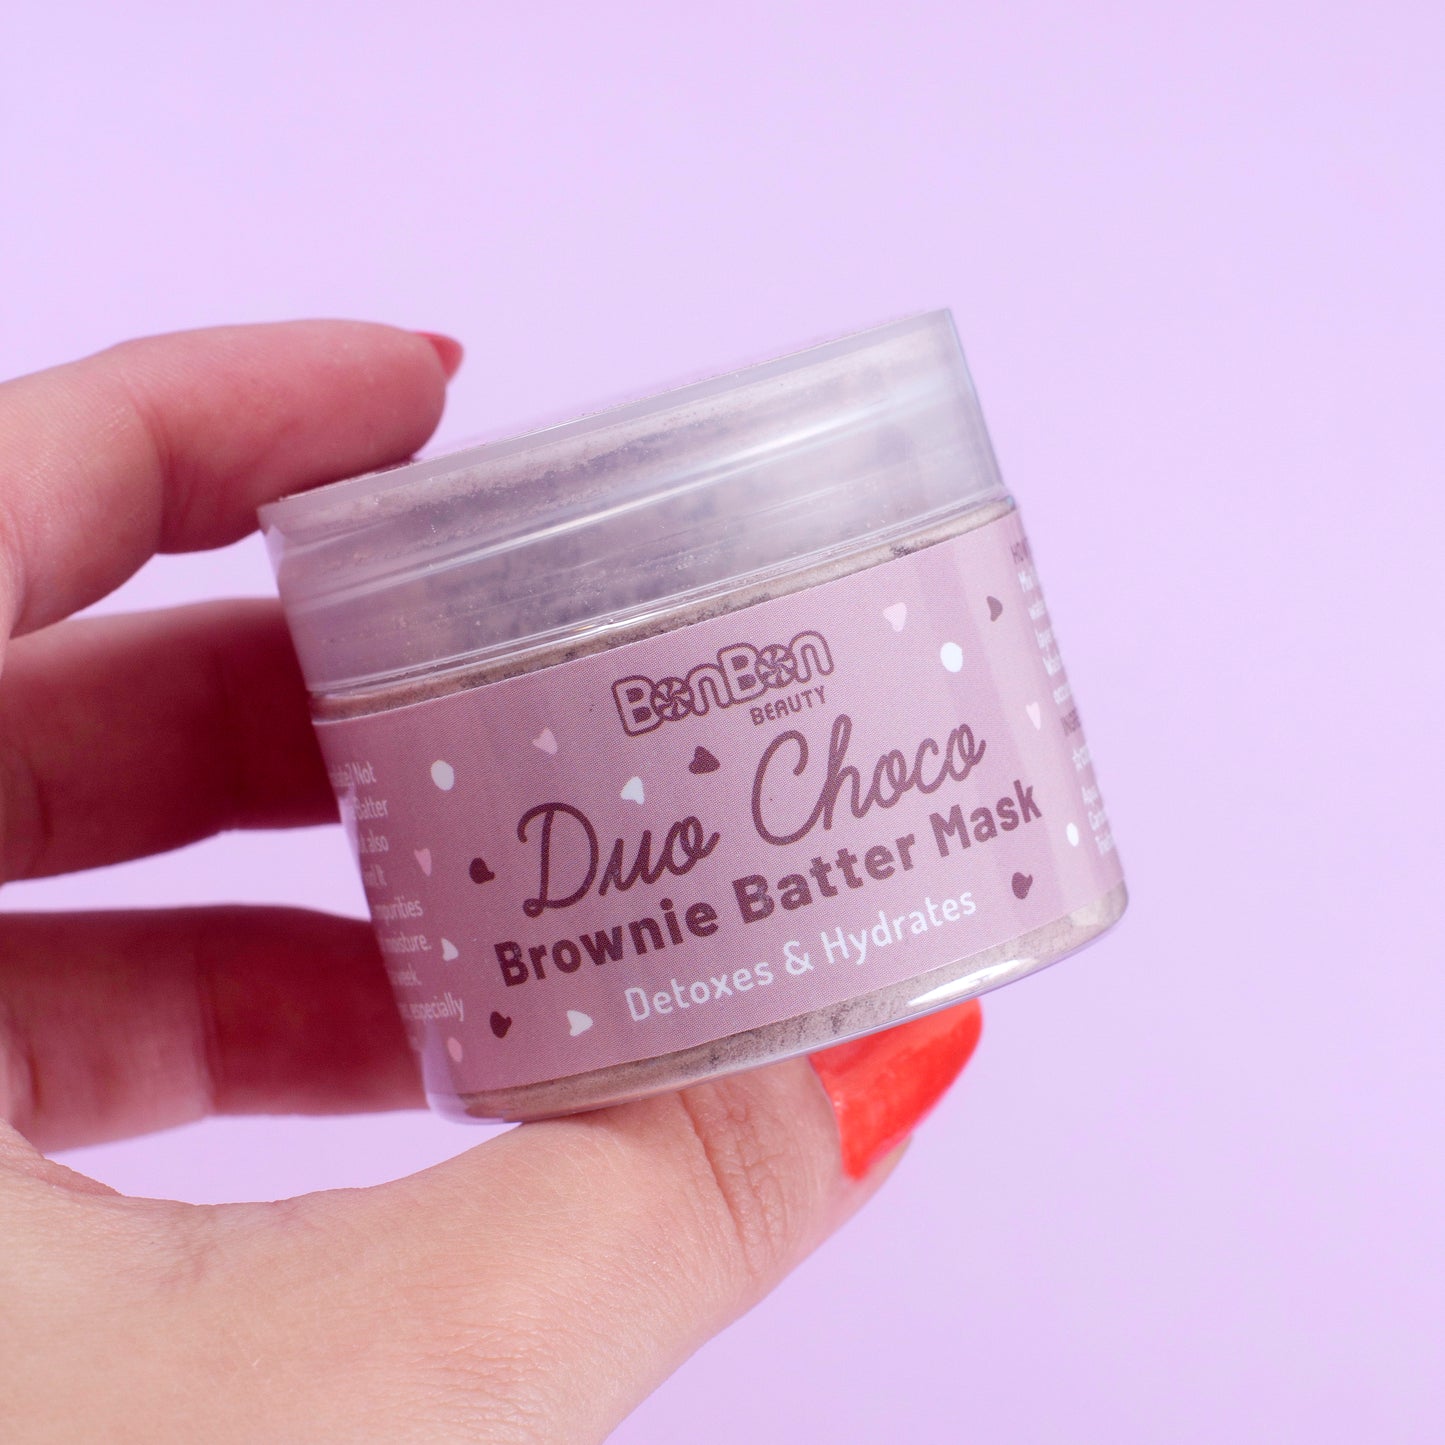 BonBon Beauty Duo Choco Brownie Batter Mask - Detoxes & Hydrates